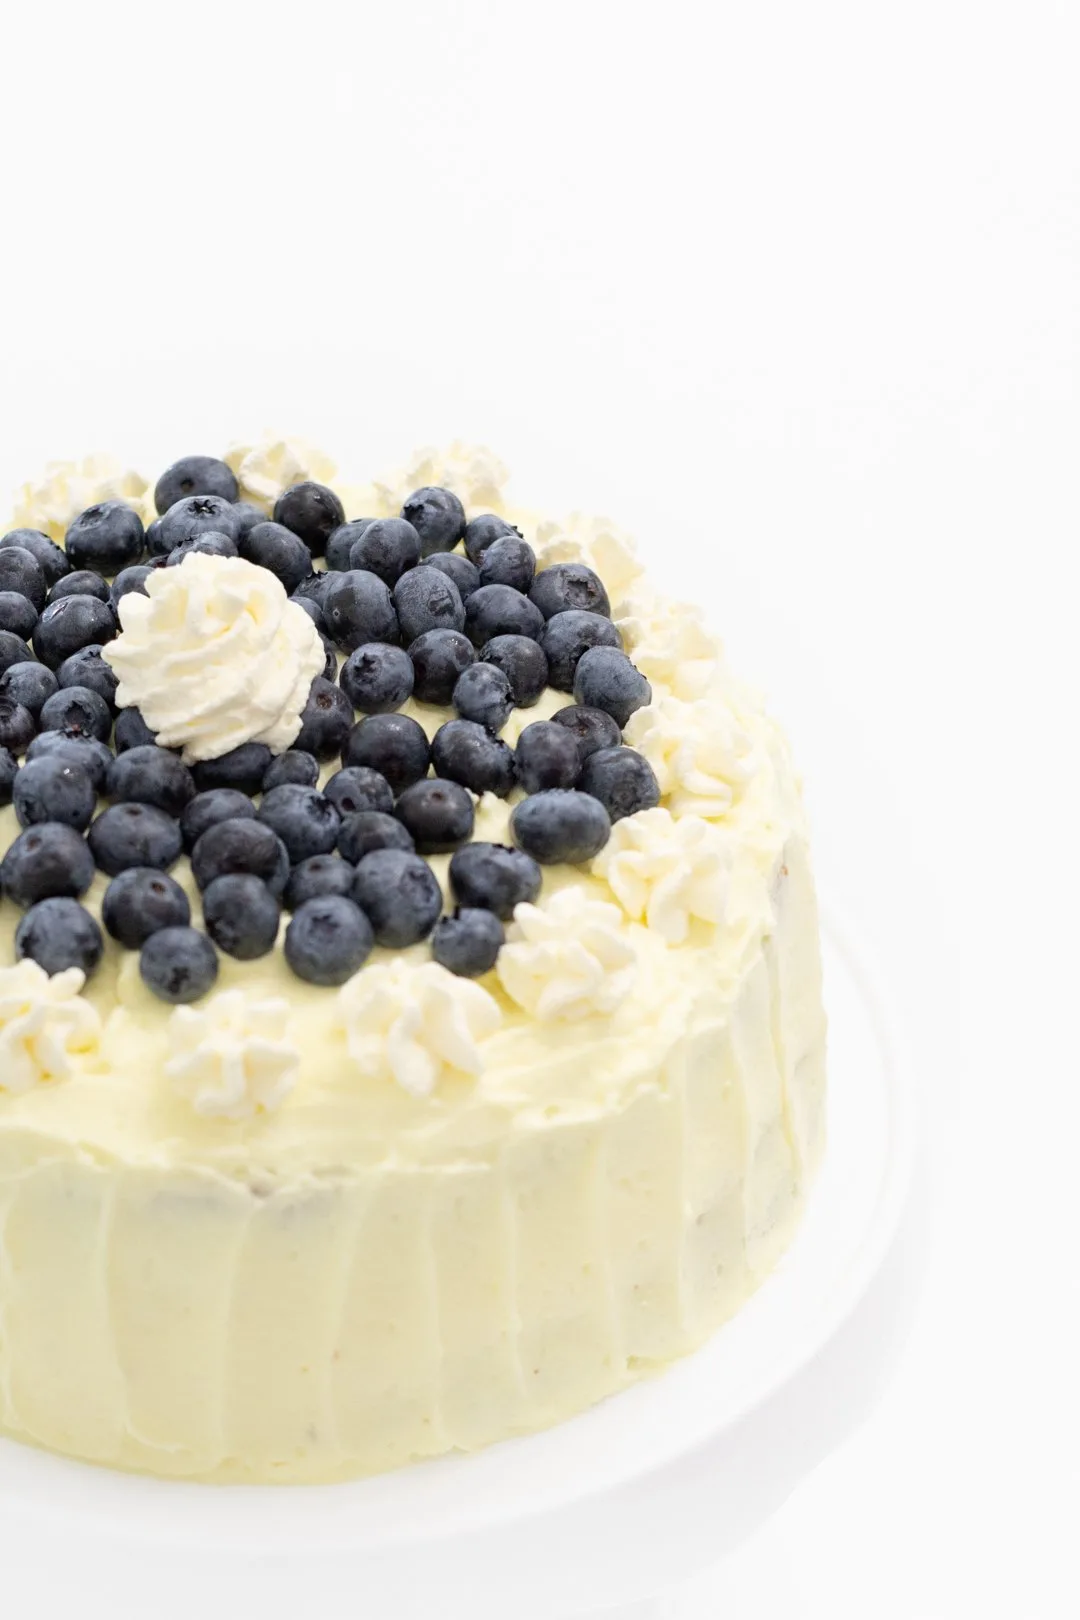 Lemon frosted cake with fresh blueberries on top.